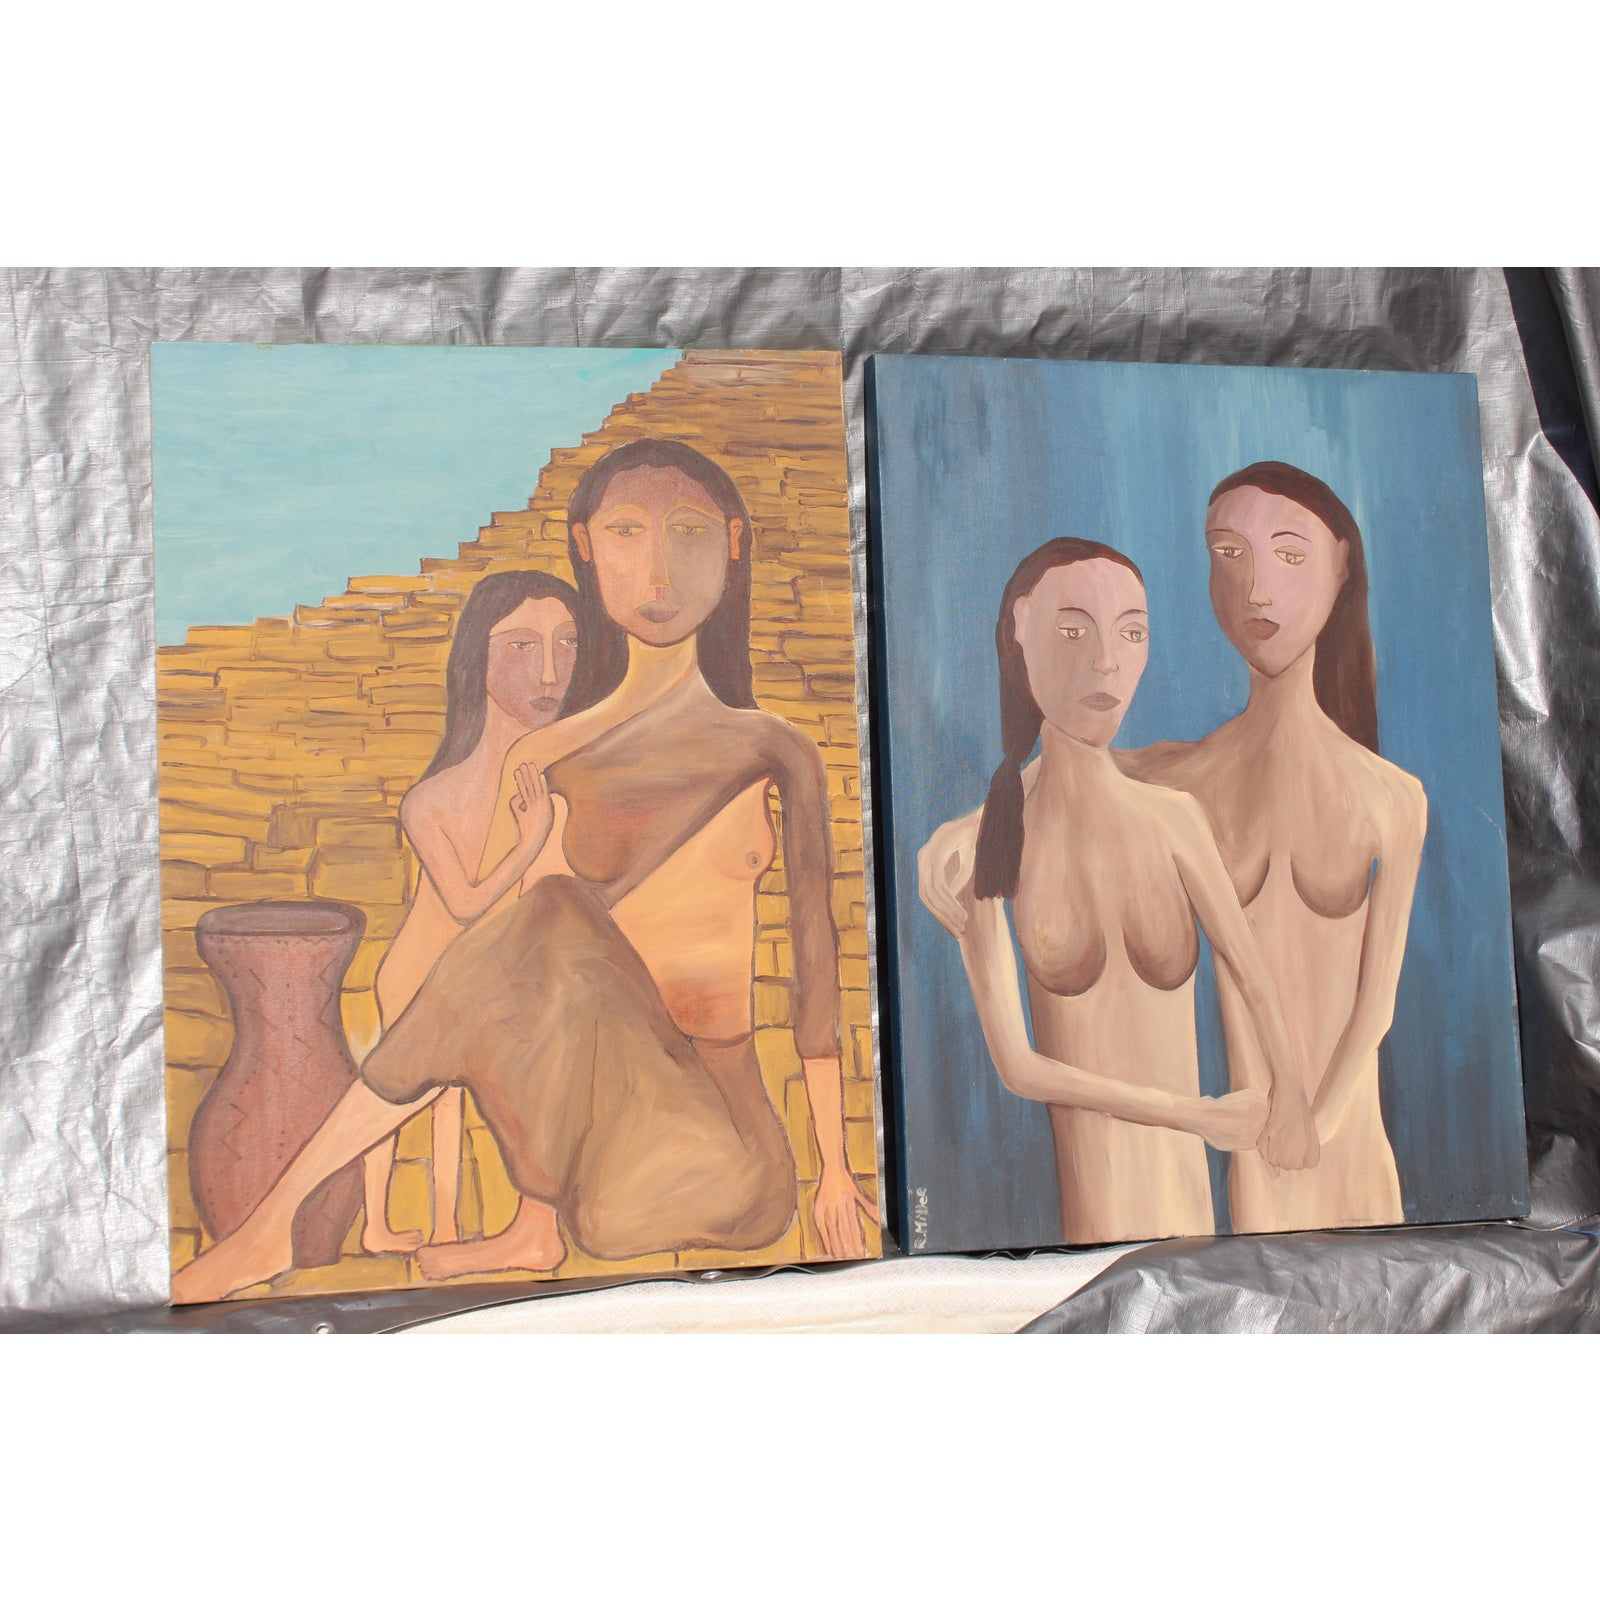 1960s-vintage-mid-century-modern-two-women-oil-paintings-a-pair-7596